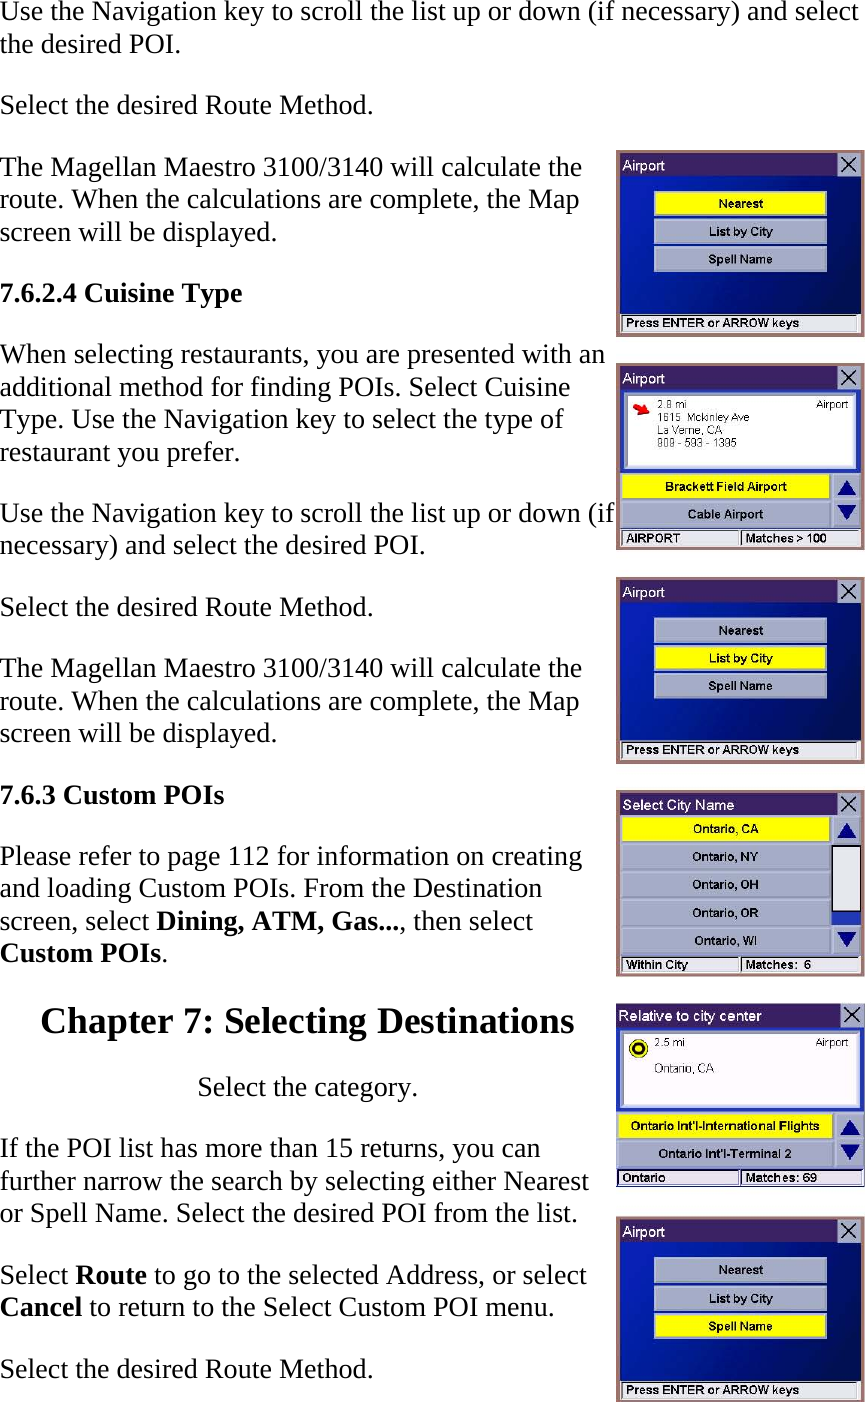 Use the Navigation key to scroll the list up or down (if necessary) and select the desired POI.  Select the desired Route Method.  The Magellan Maestro 3100/3140 will calculate the route. When the calculations are complete, the Map screen will be displayed.  7.6.2.4 Cuisine Type  When selecting restaurants, you are presented with an additional method for finding POIs. Select Cuisine Type. Use the Navigation key to select the type of restaurant you prefer.  Use the Navigation key to scroll the list up or down (if necessary) and select the desired POI.  Select the desired Route Method.  The Magellan Maestro 3100/3140 will calculate the route. When the calculations are complete, the Map screen will be displayed.  7.6.3 Custom POIs  Please refer to page 112 for information on creating and loading Custom POIs. From the Destination screen, select Dining, ATM, Gas..., then select Custom POIs.  Chapter 7: Selecting Destinations  Select the category.  If the POI list has more than 15 returns, you can further narrow the search by selecting either Nearest or Spell Name. Select the desired POI from the list.  Select Route to go to the selected Address, or select Cancel to return to the Select Custom POI menu.  Select the desired Route Method.  